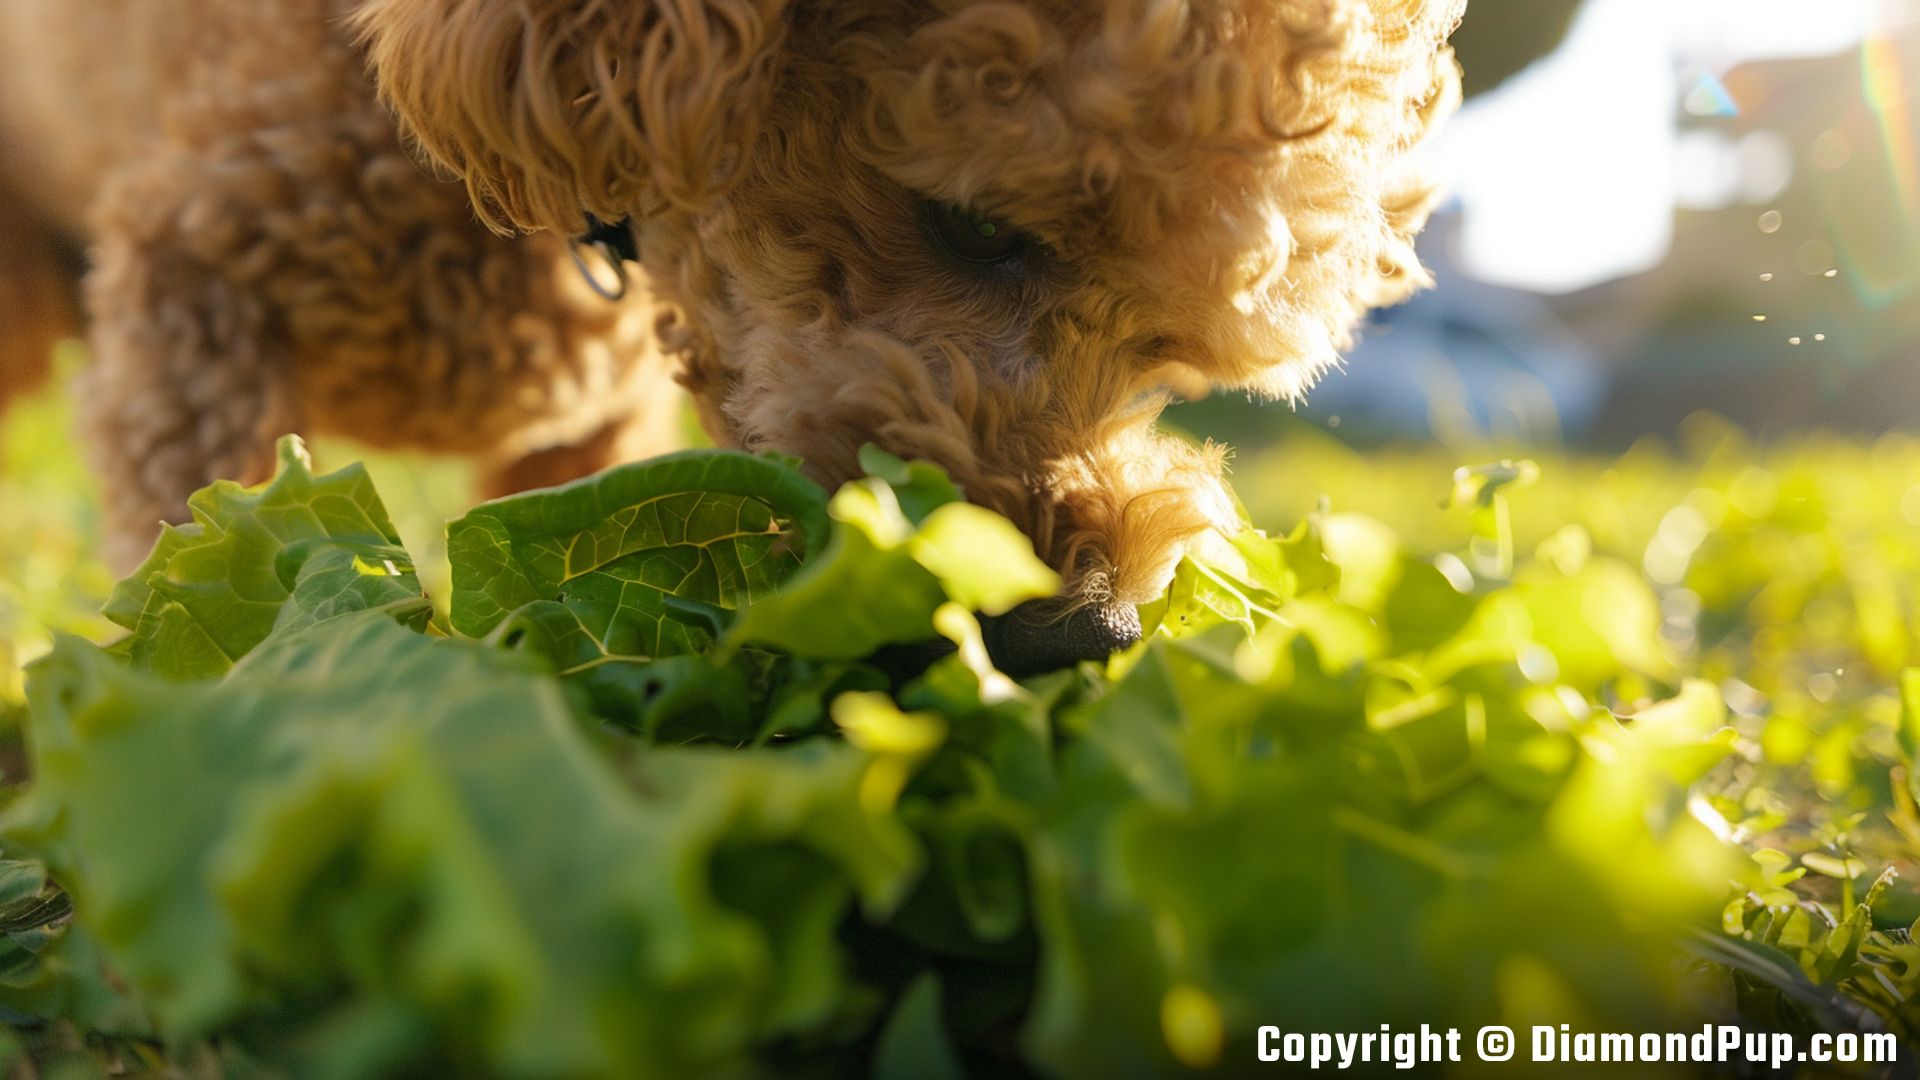 Photograph of an Adorable Poodle Snacking on Lettuce